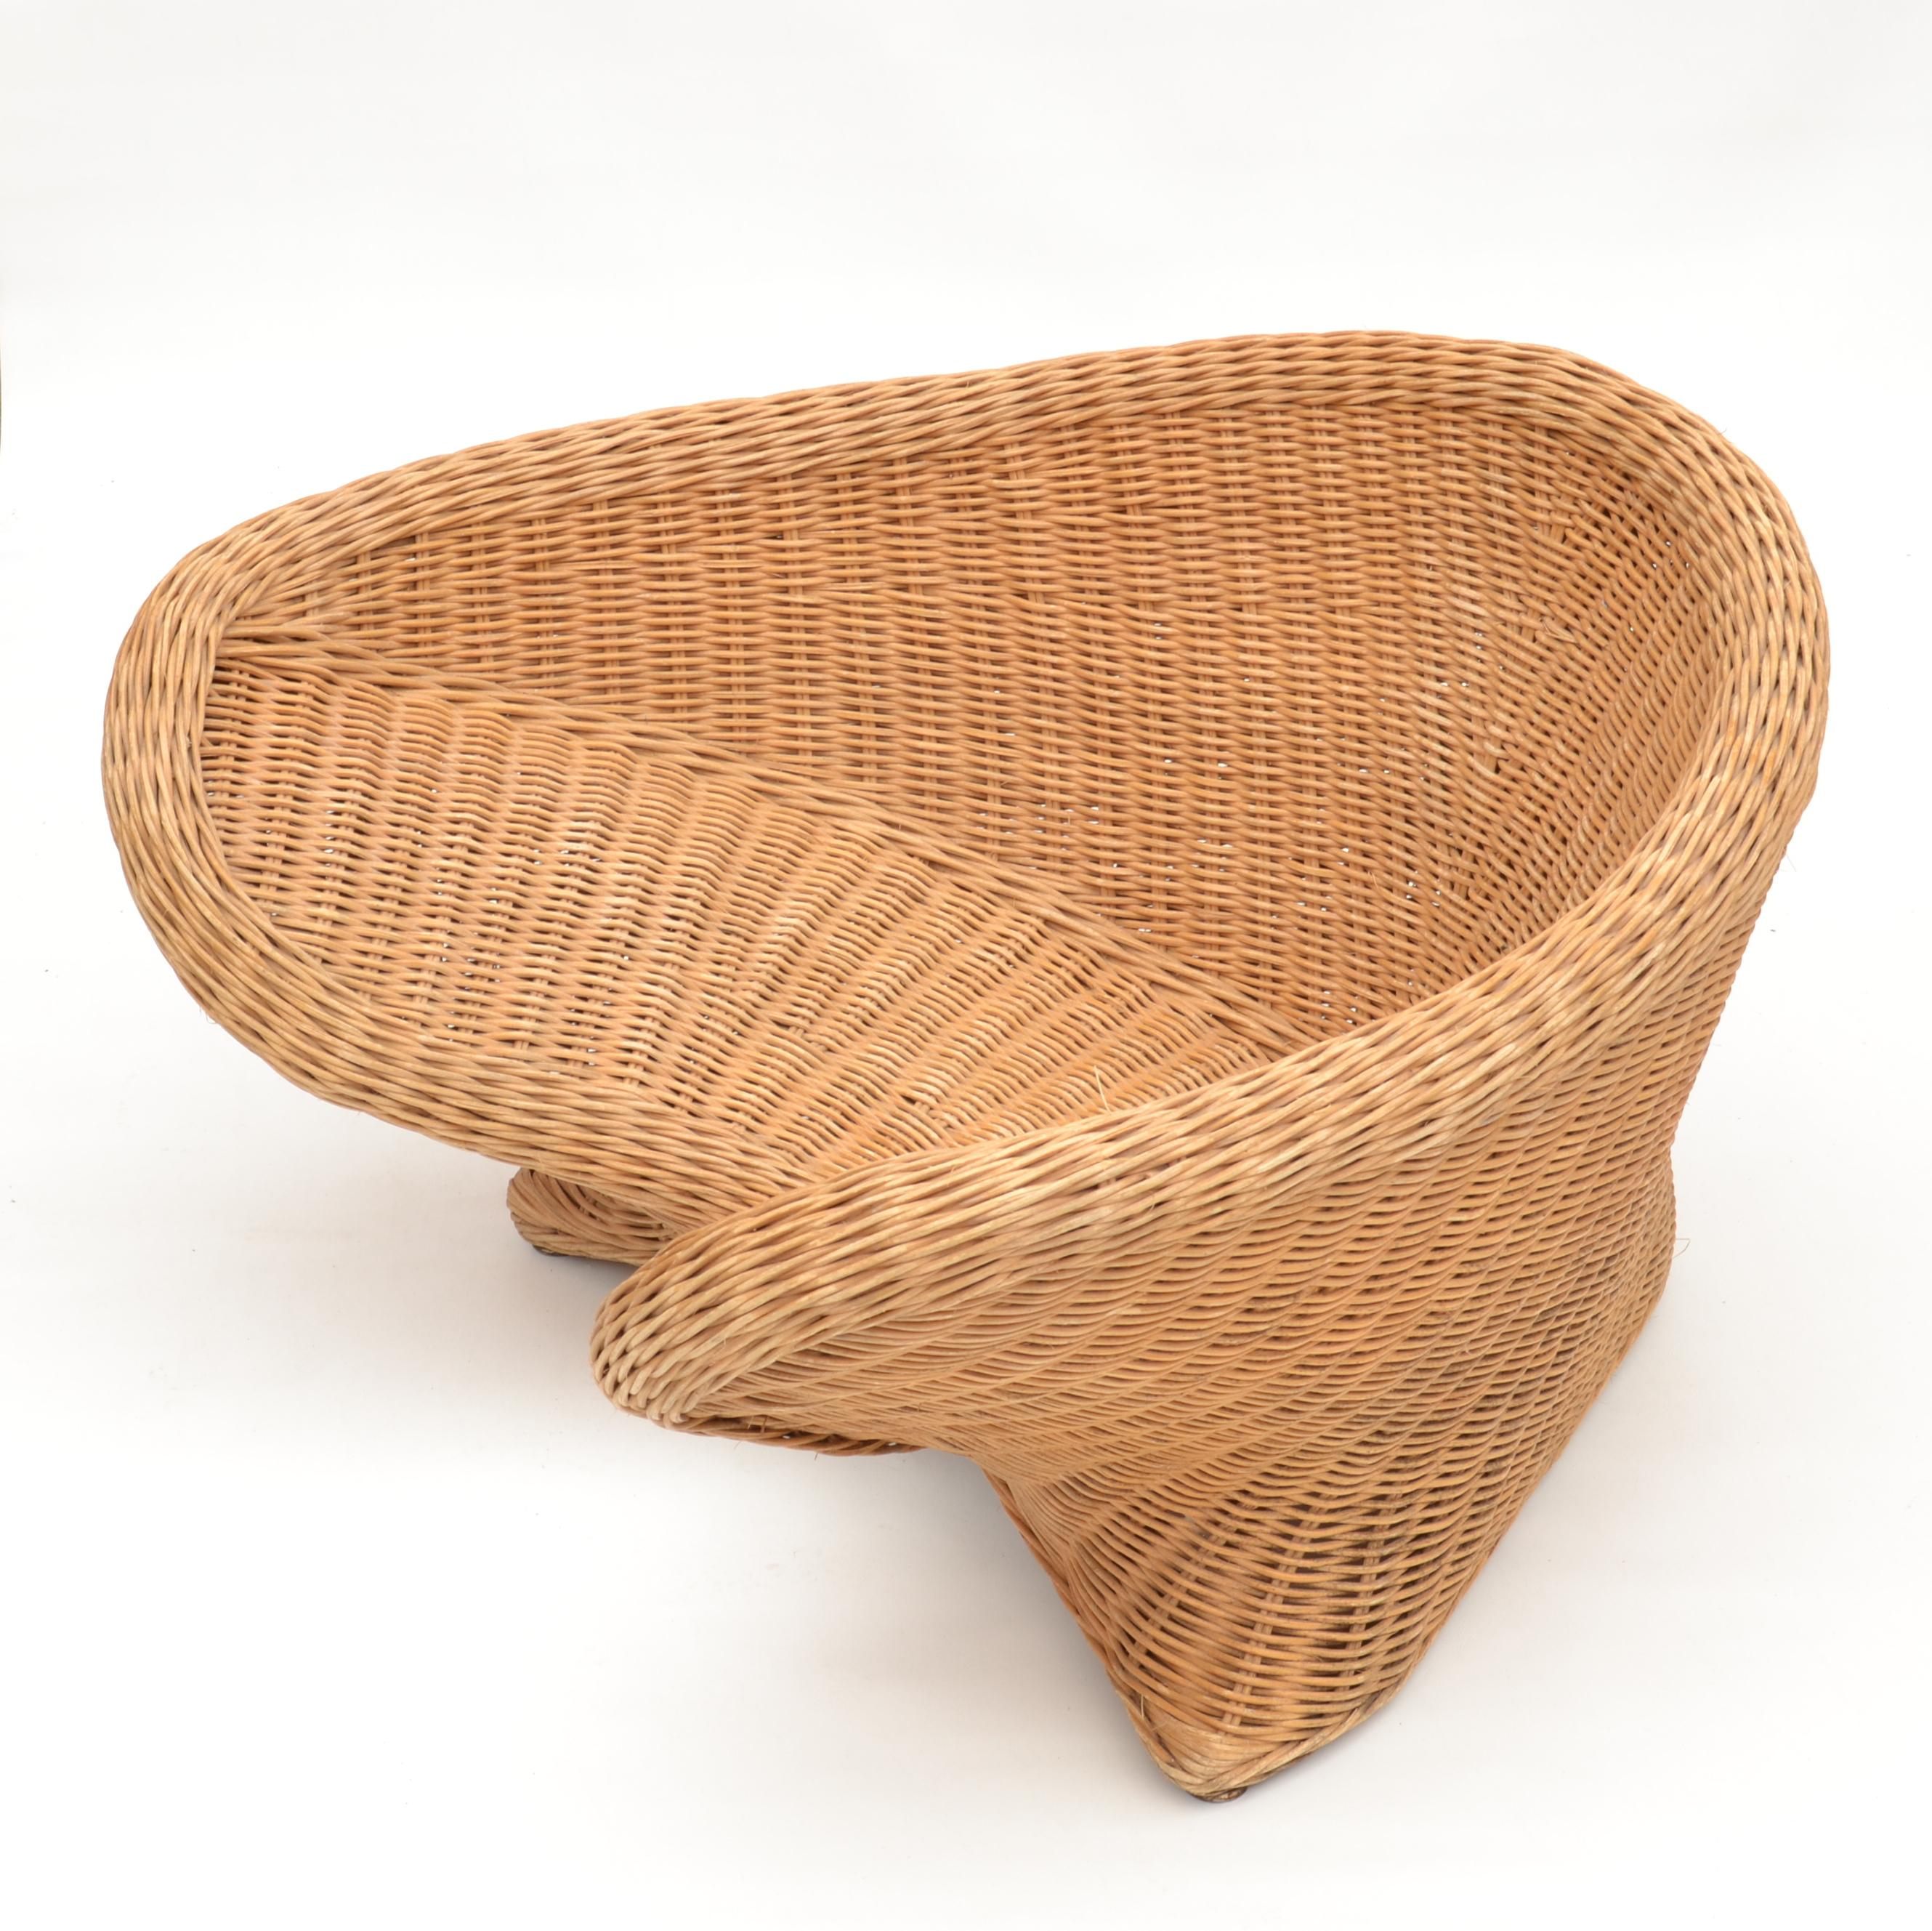 Mid-Century Modern Curvaceous Sculptural Cane Chair for Indoor or Outdoor